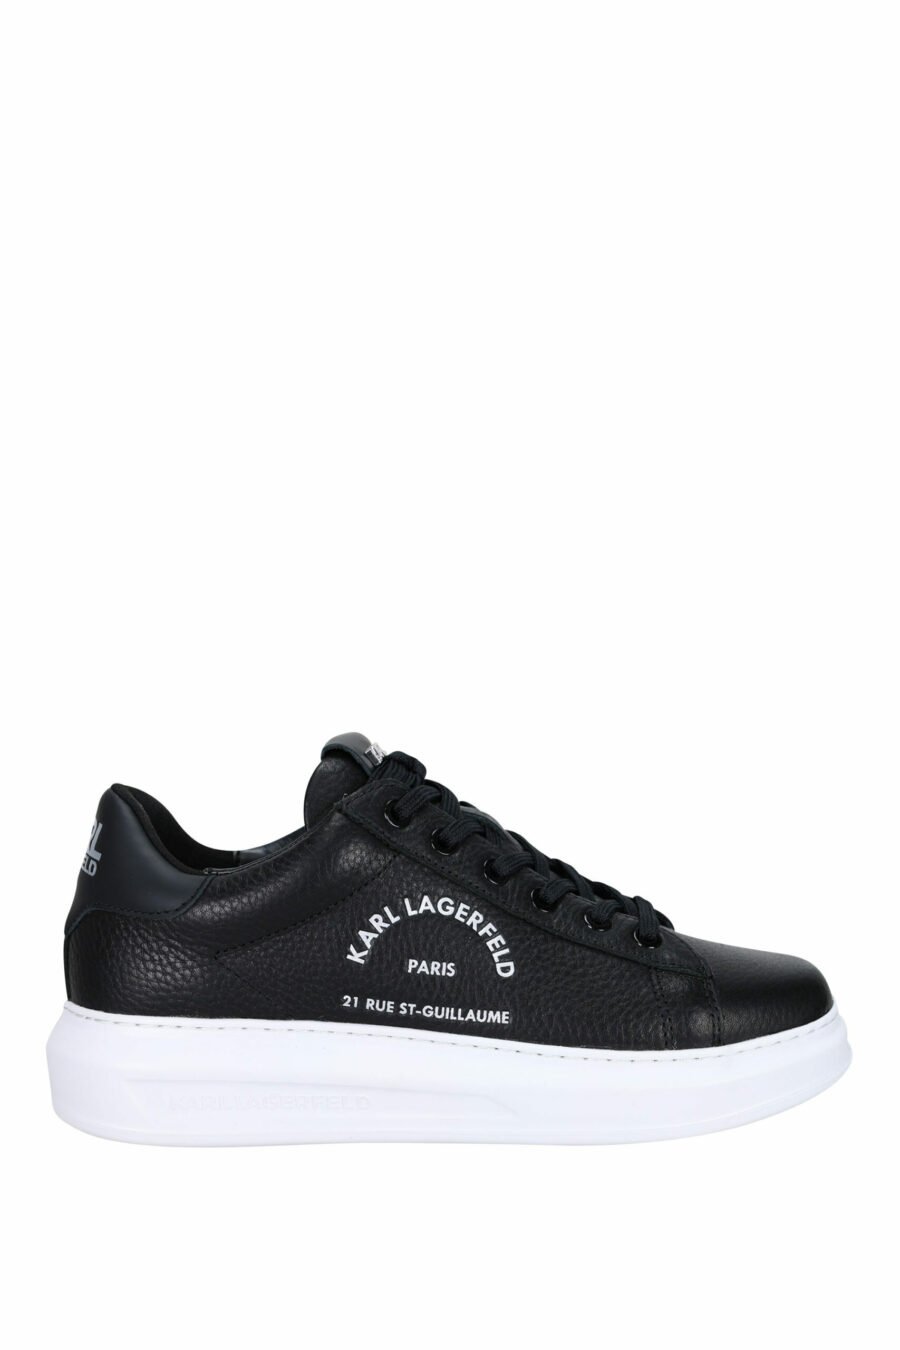 Black "kapri mens" textured trainers with white "rue st guillaume" logo - 5059529323782 scaled